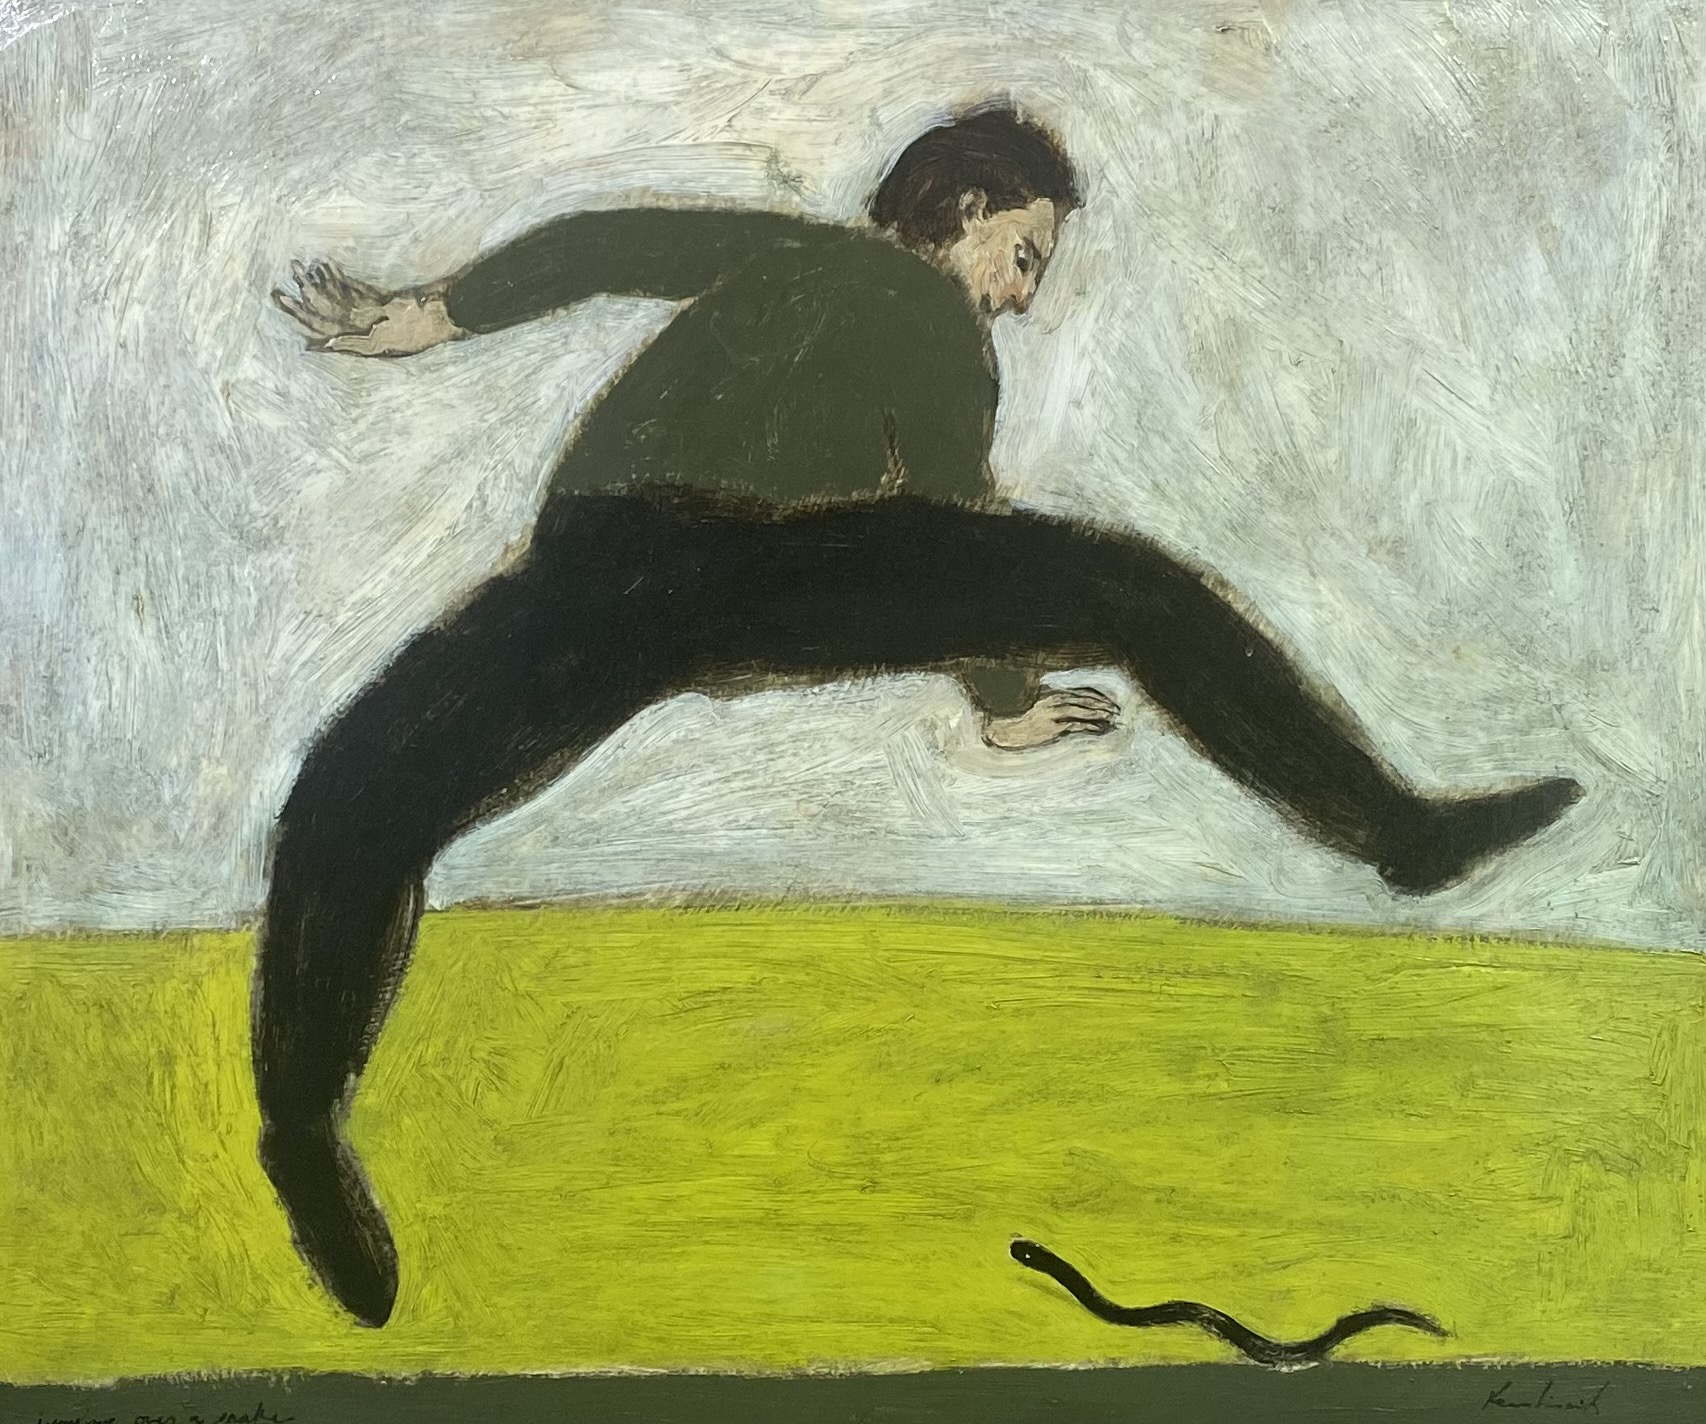 painting of man jumping over a snake